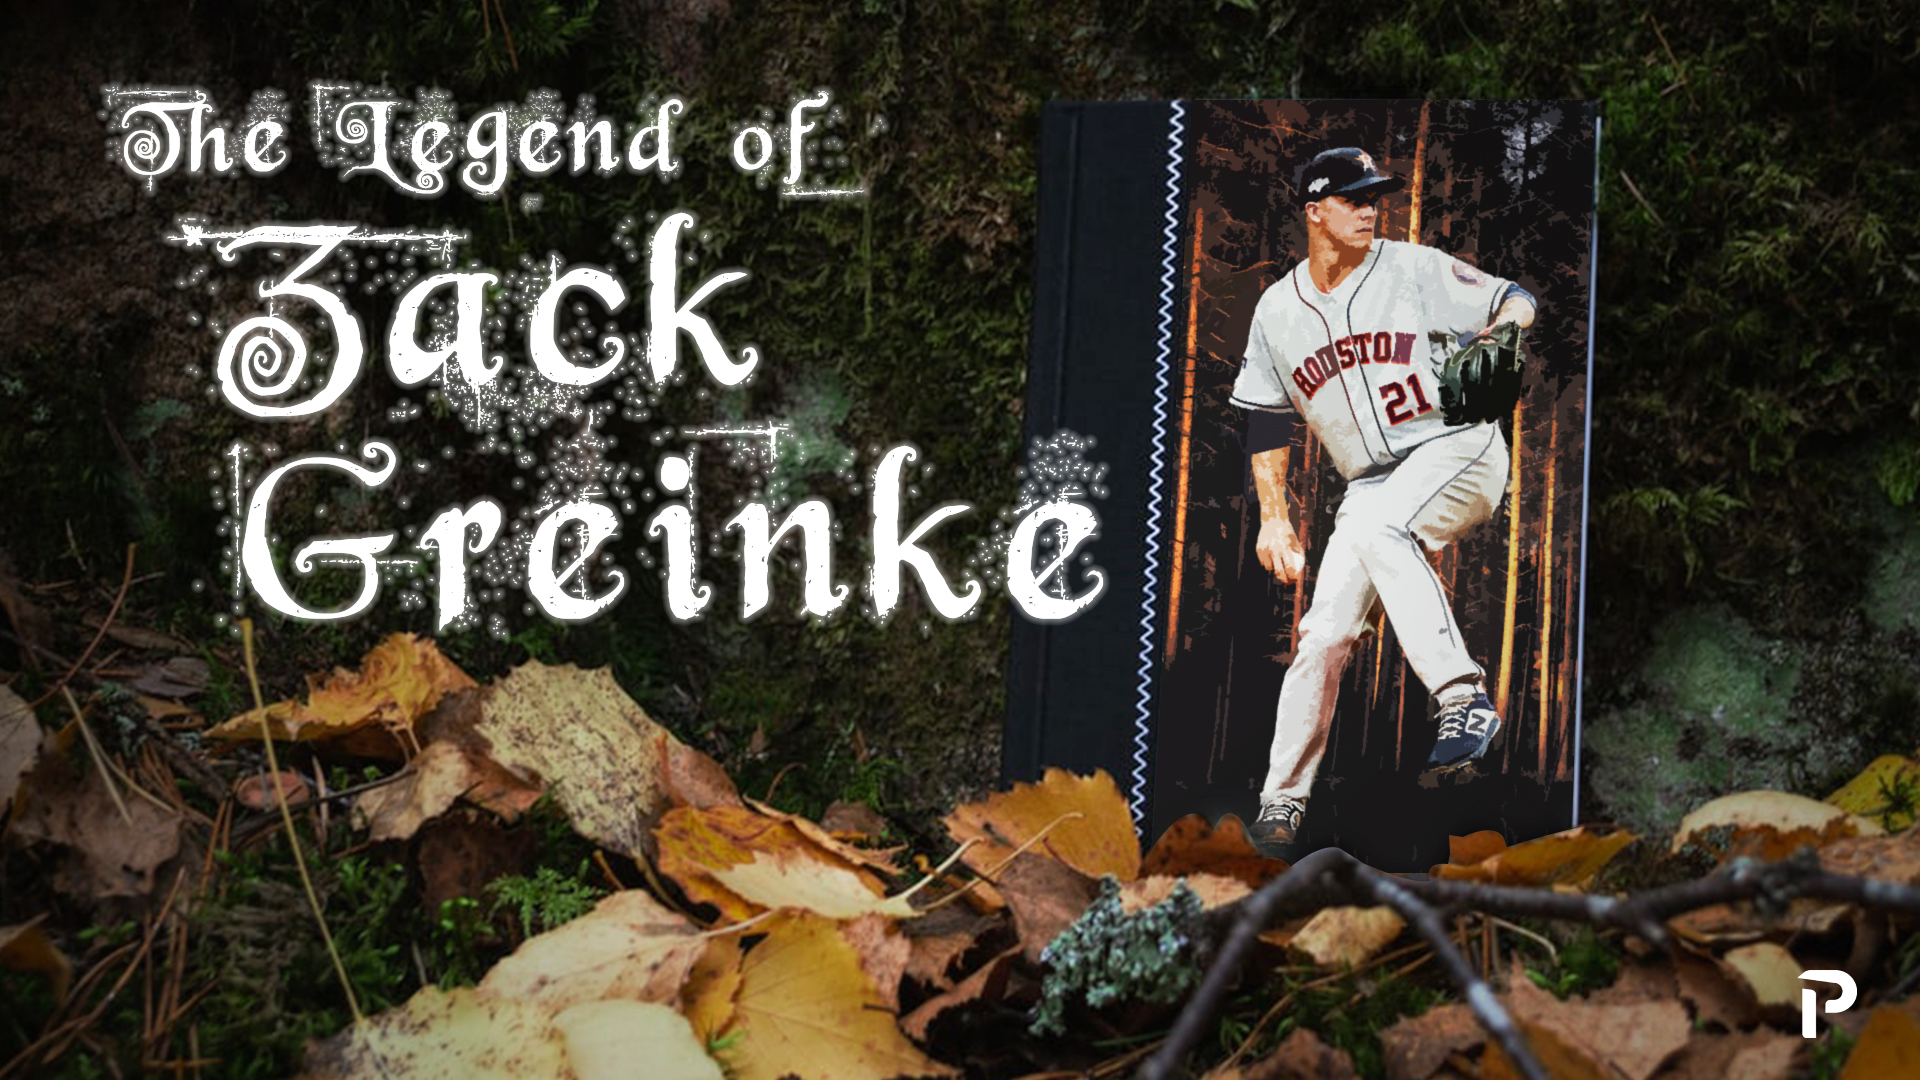 Snake Bytes, 12/12: All I want for Christmas is a Zack Greinke jersey